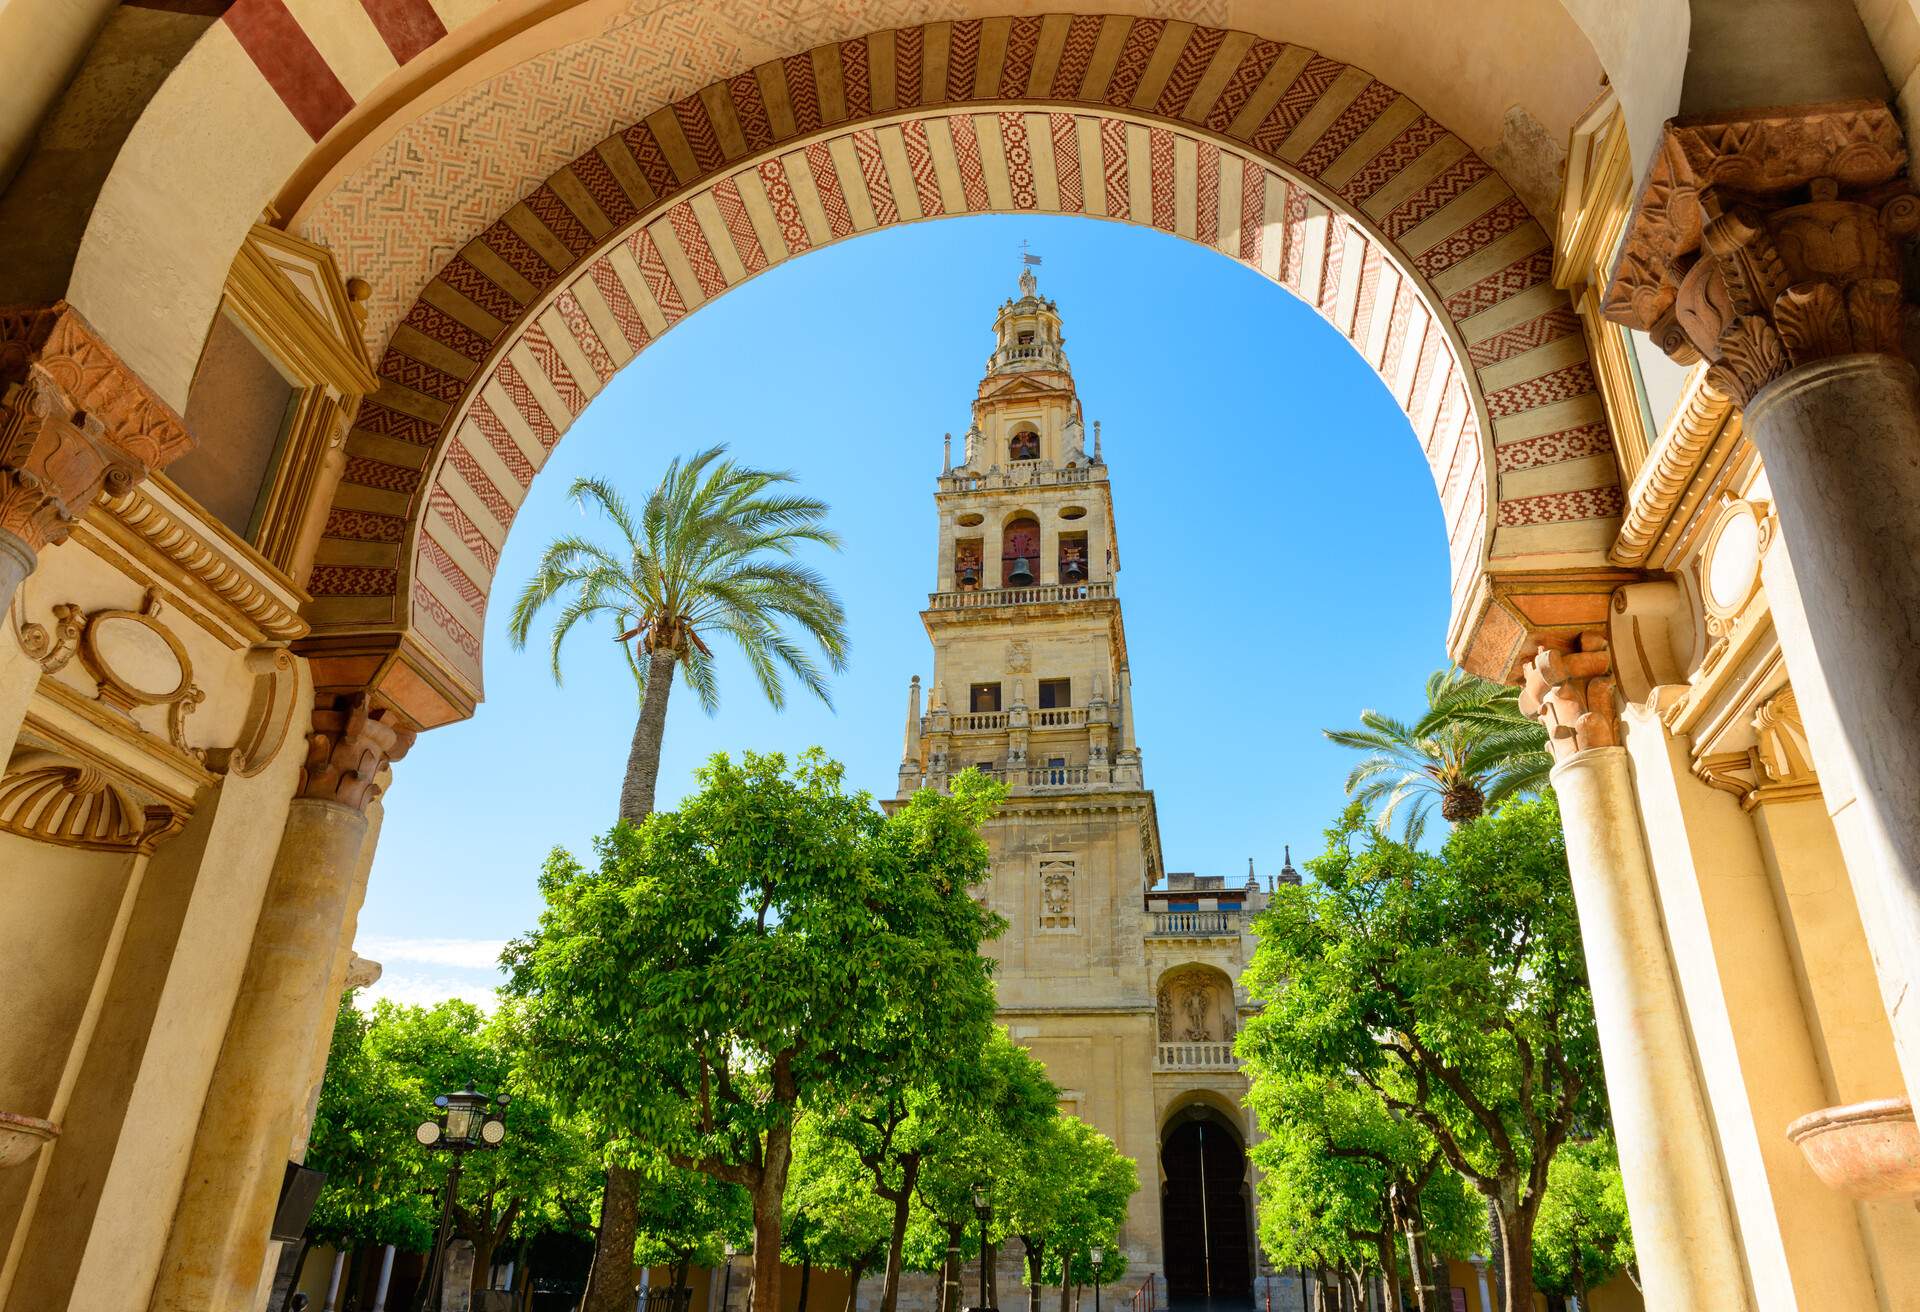 DEST_SPAIN_CORDOBA_THE-MOSQUE-CATHEDRAL_GettyImages-477572440-1.jpg